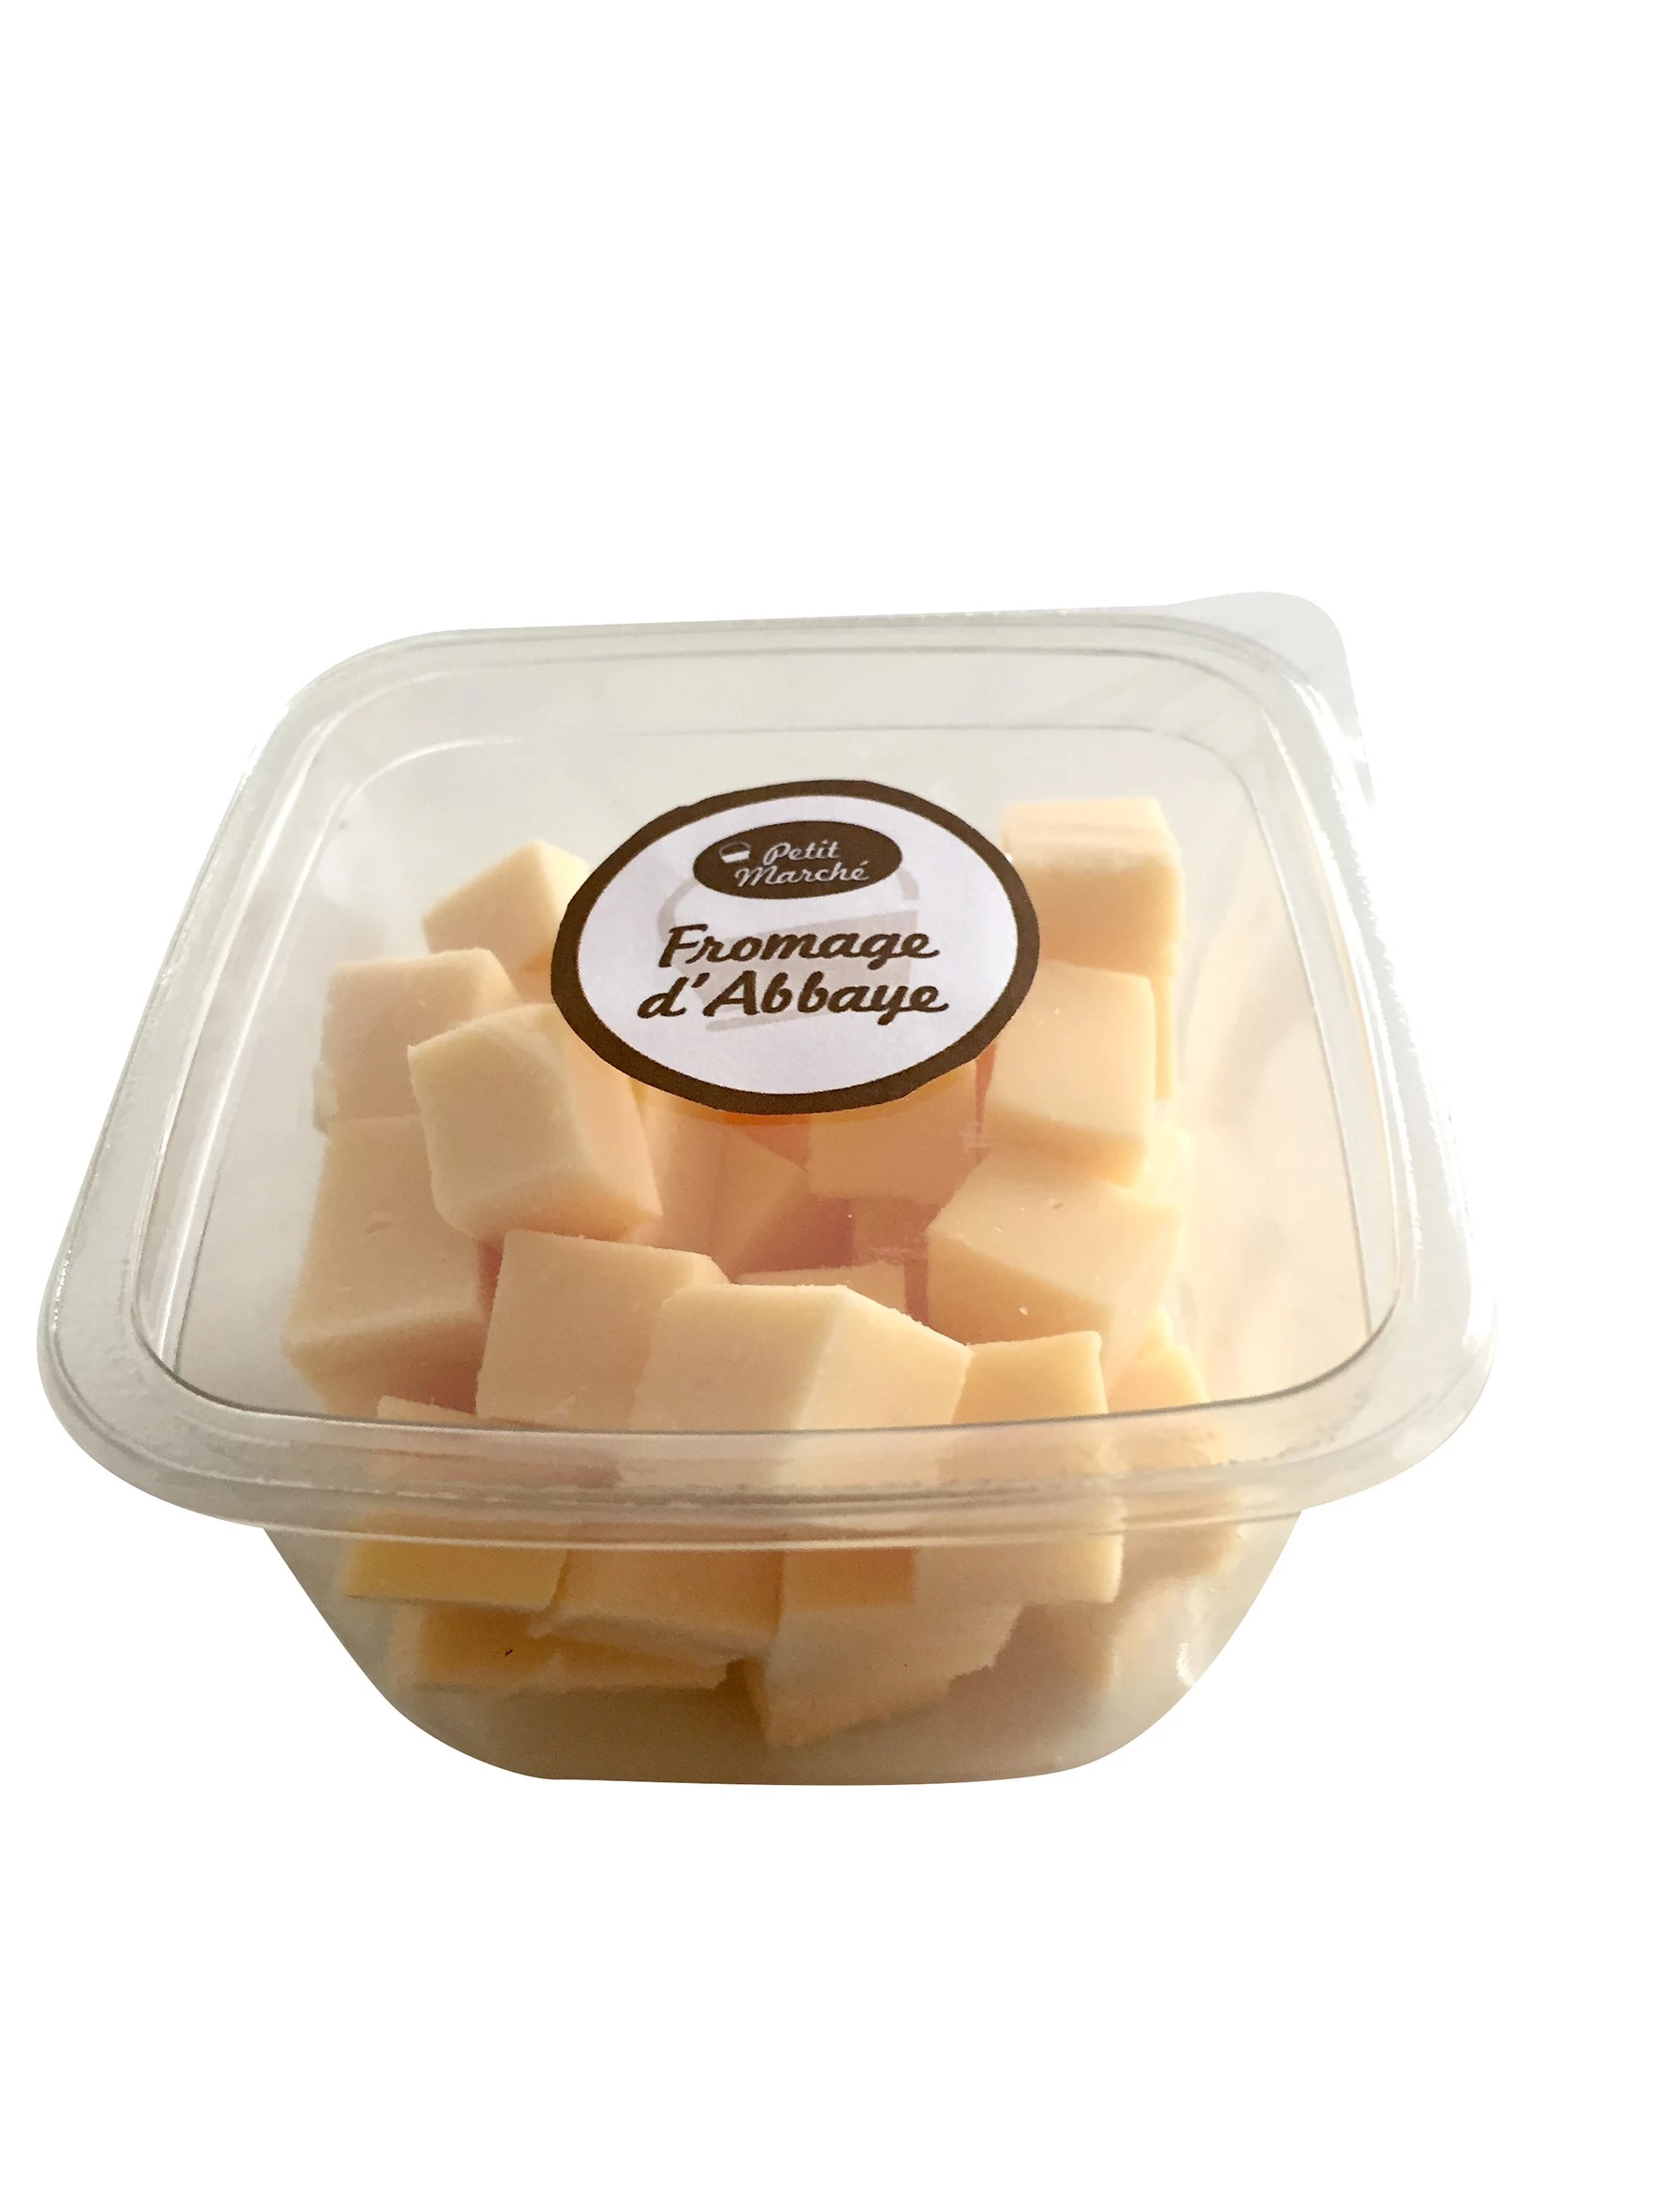 Des Fromage Abbaye Lp 26 120g